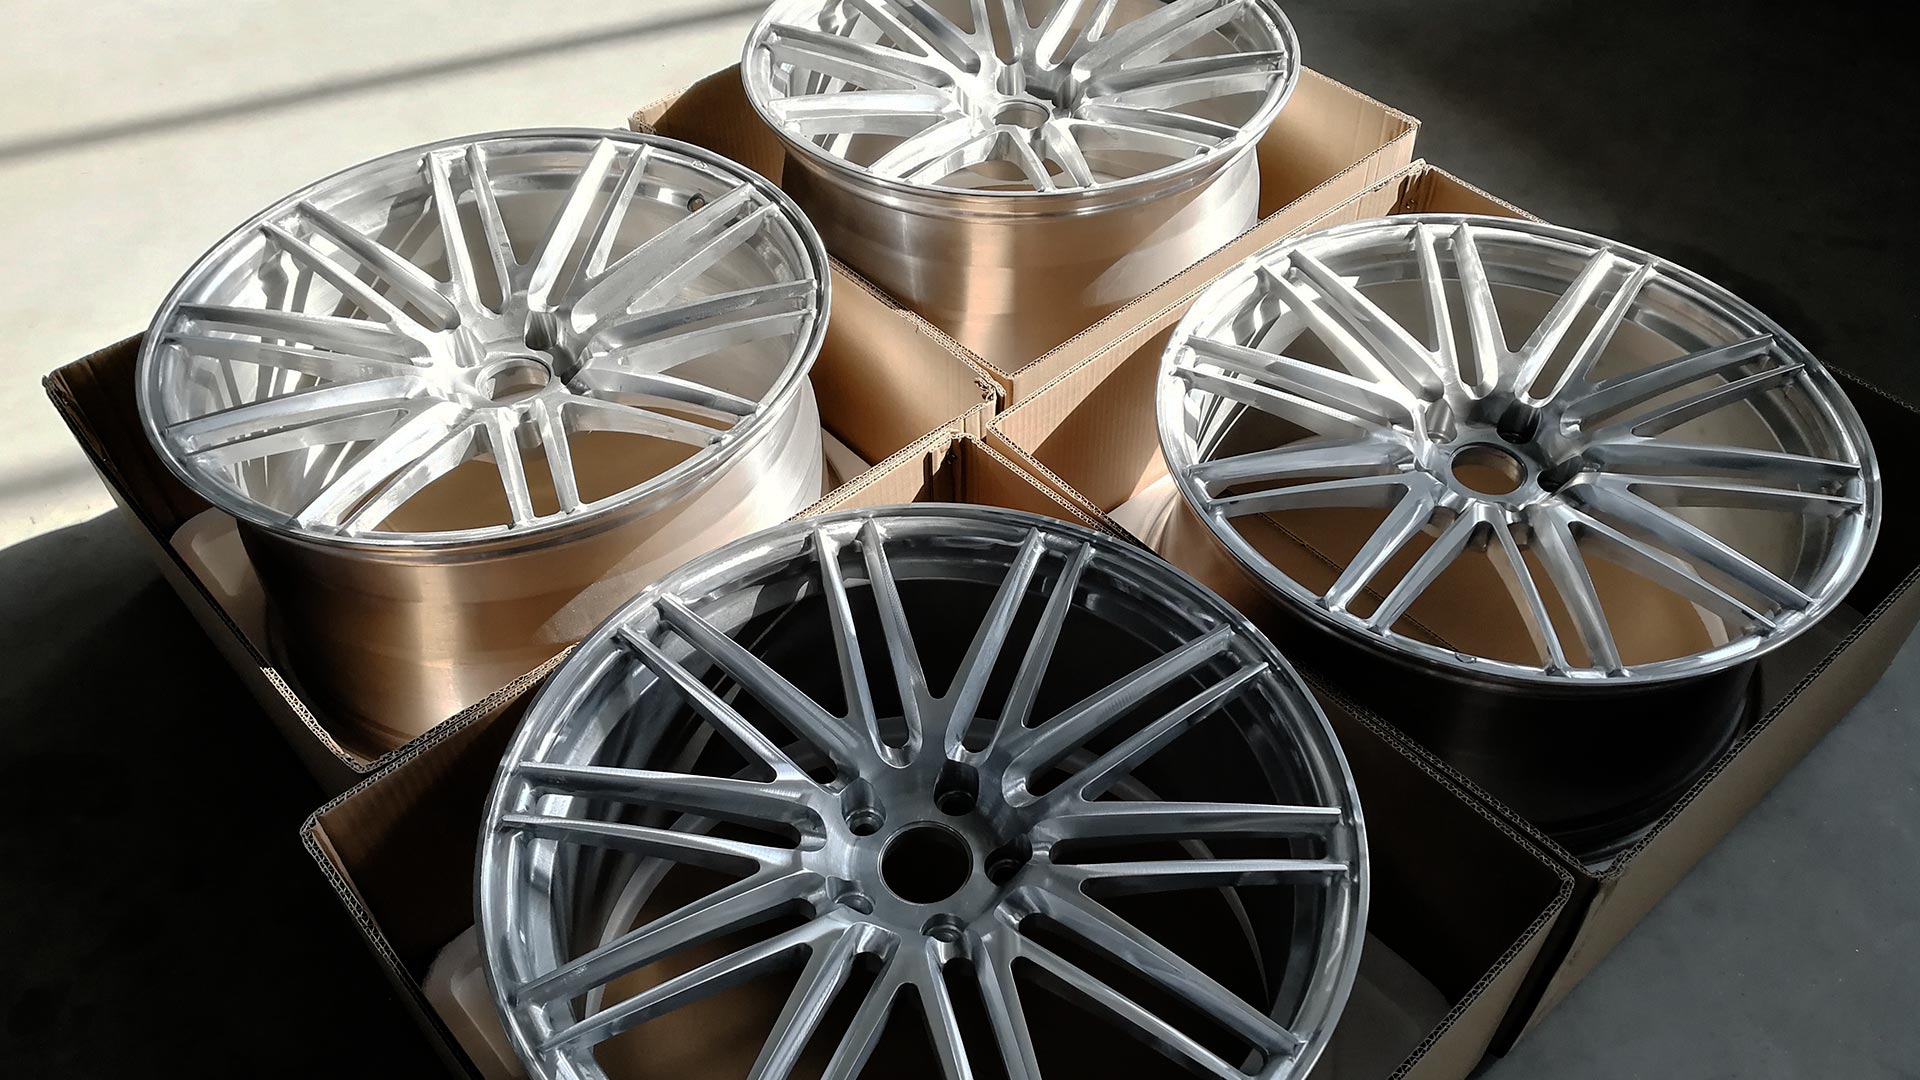 21 inch Custom Forged Wheels in polished finish on warehouse floor